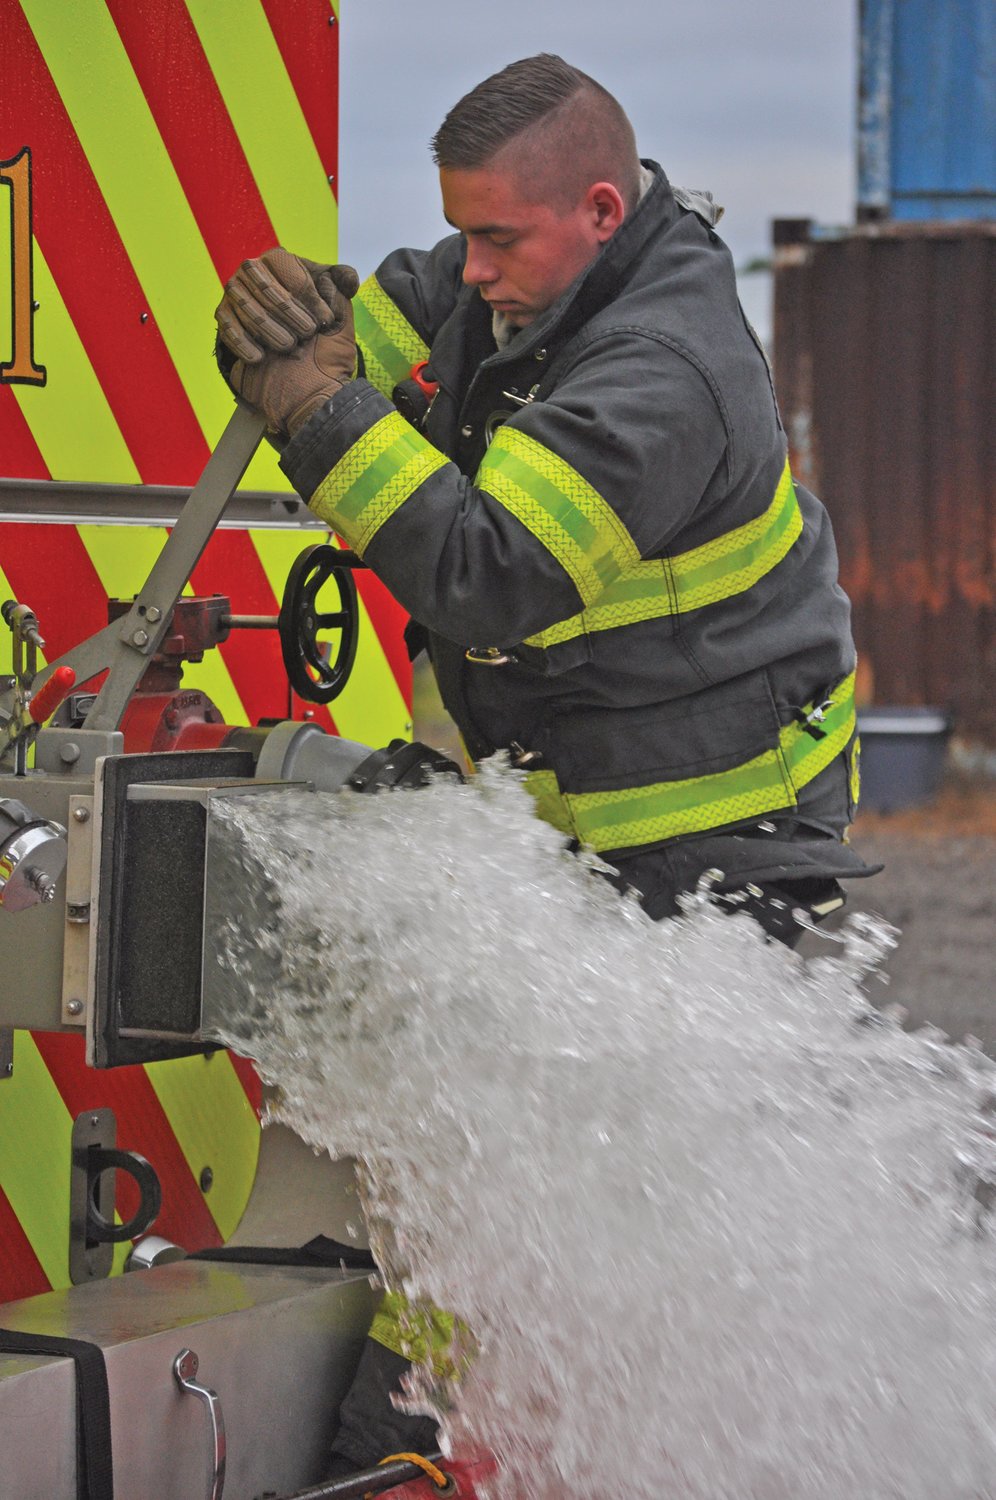 Crawfordsville firefighter Gavin Waddell pumps water for the Fire Ops 101 event at the department